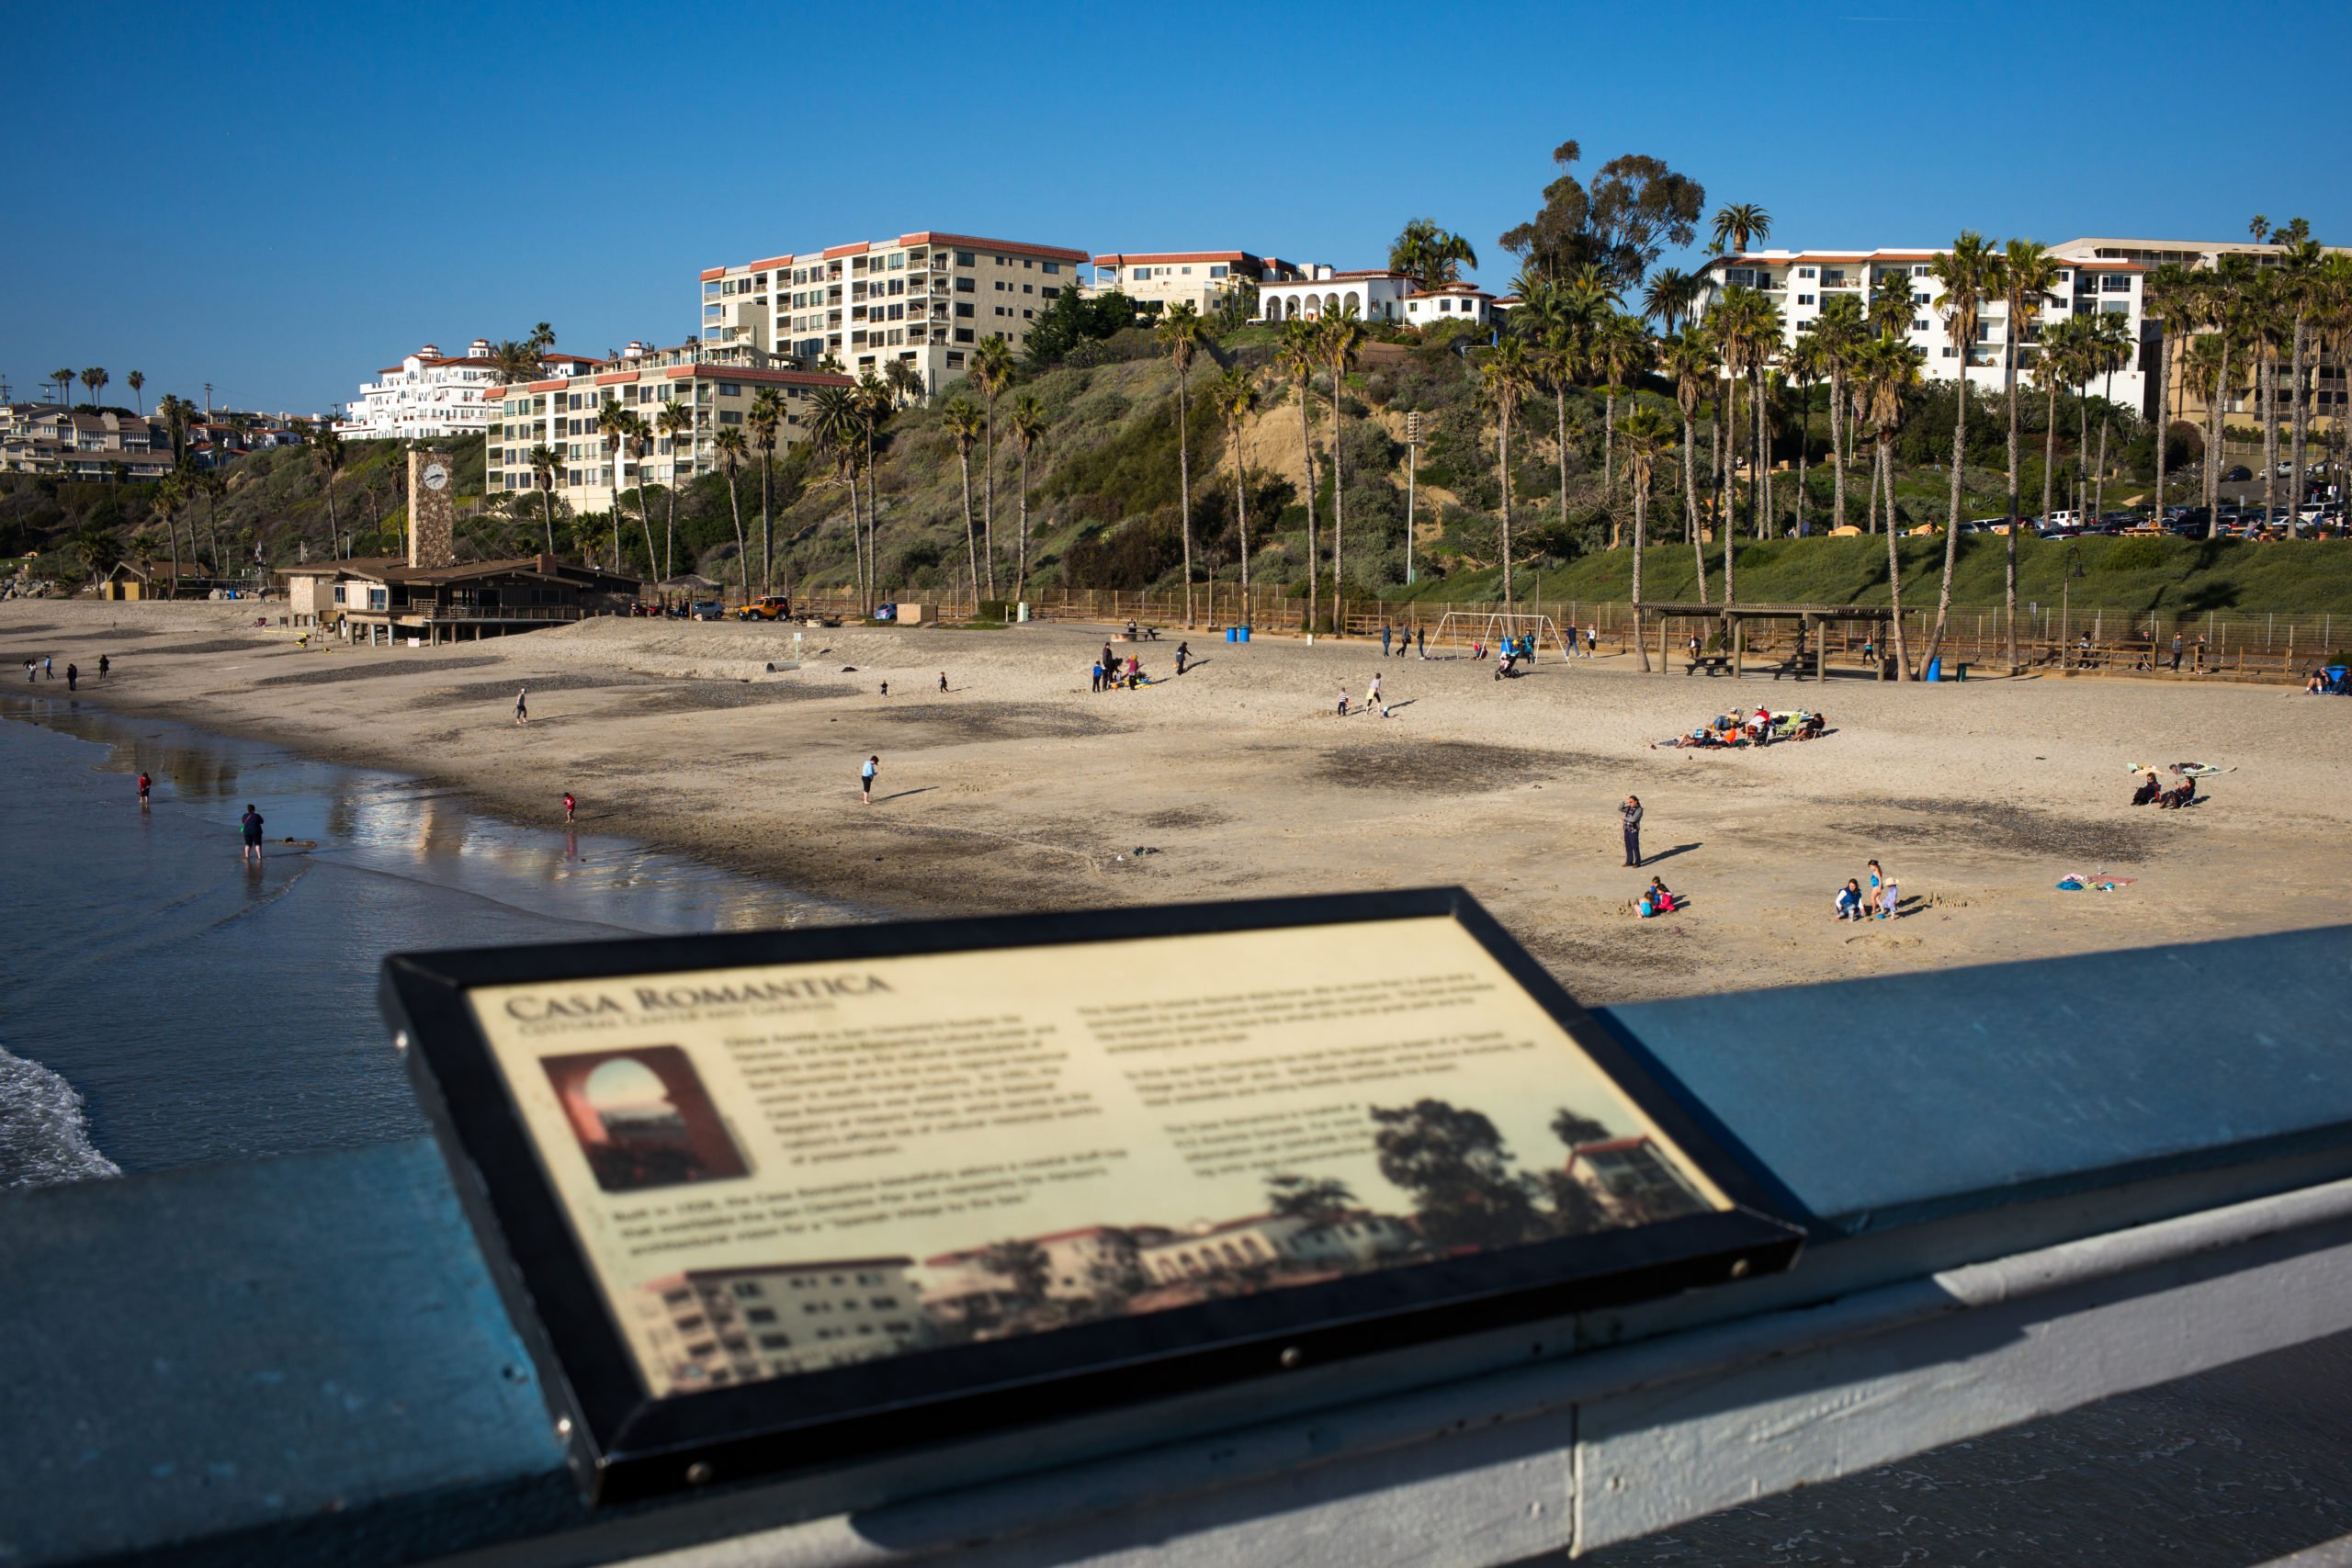 Tourists and local residents sit along the beach with a view of hillside condominiums January 2, 2015 in San Clemente, California. (Photo by Robert Nickelsberg/Getty Images)